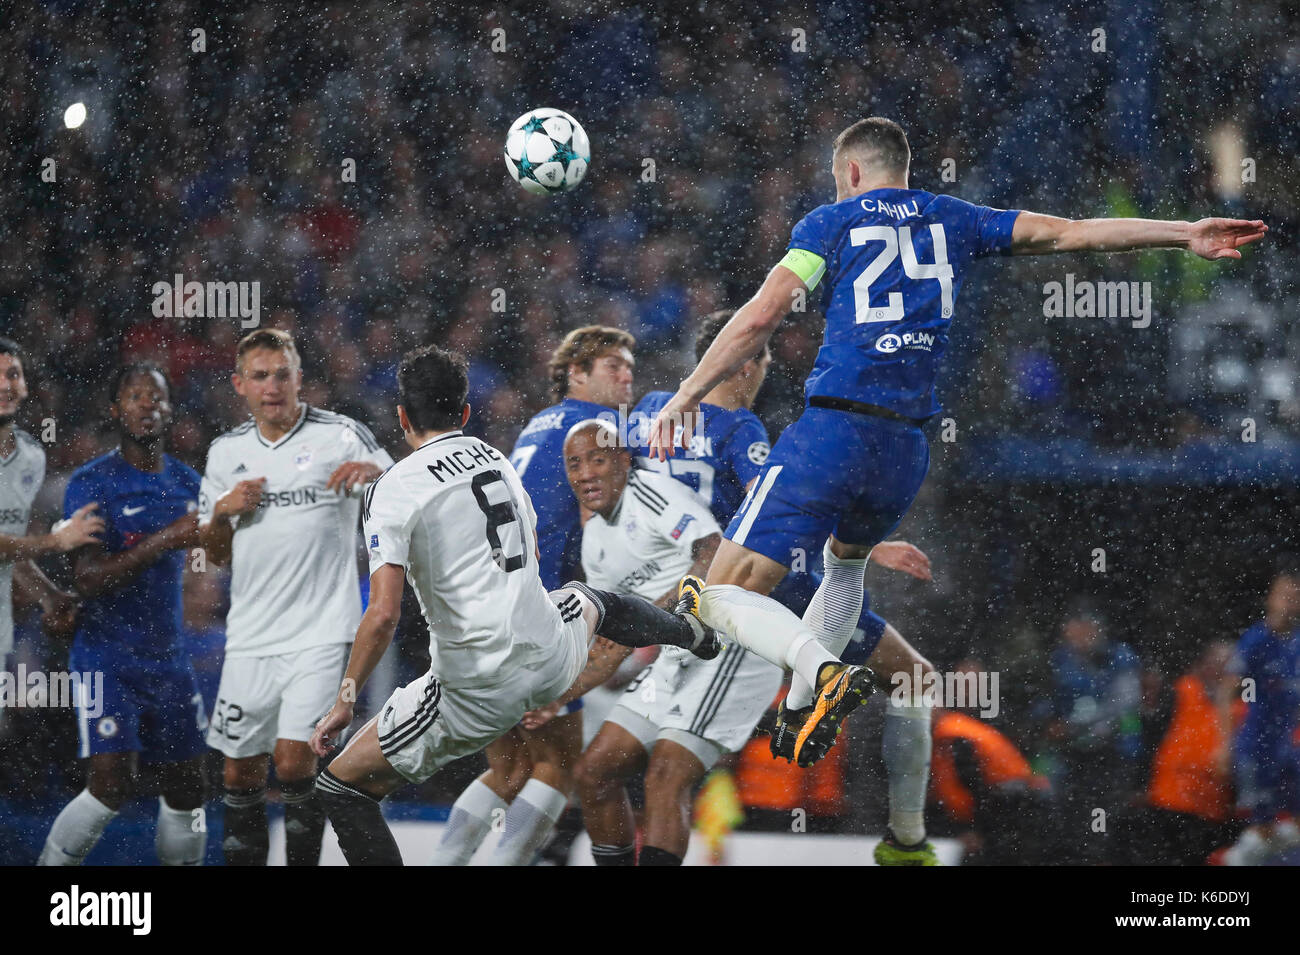 London, UK. 12th Sep, 2017. Gary Cahill (Above) of Chelsea heads for the ball during the UEFA Champions League Group C match between Chelsea and Qarabag FK at Stamford Bridge Stadium in London, Britain on Sept. 12, 2017. Chelsea won 6-0. Credit: Han Yan/Xinhua/Alamy Live News Stock Photo